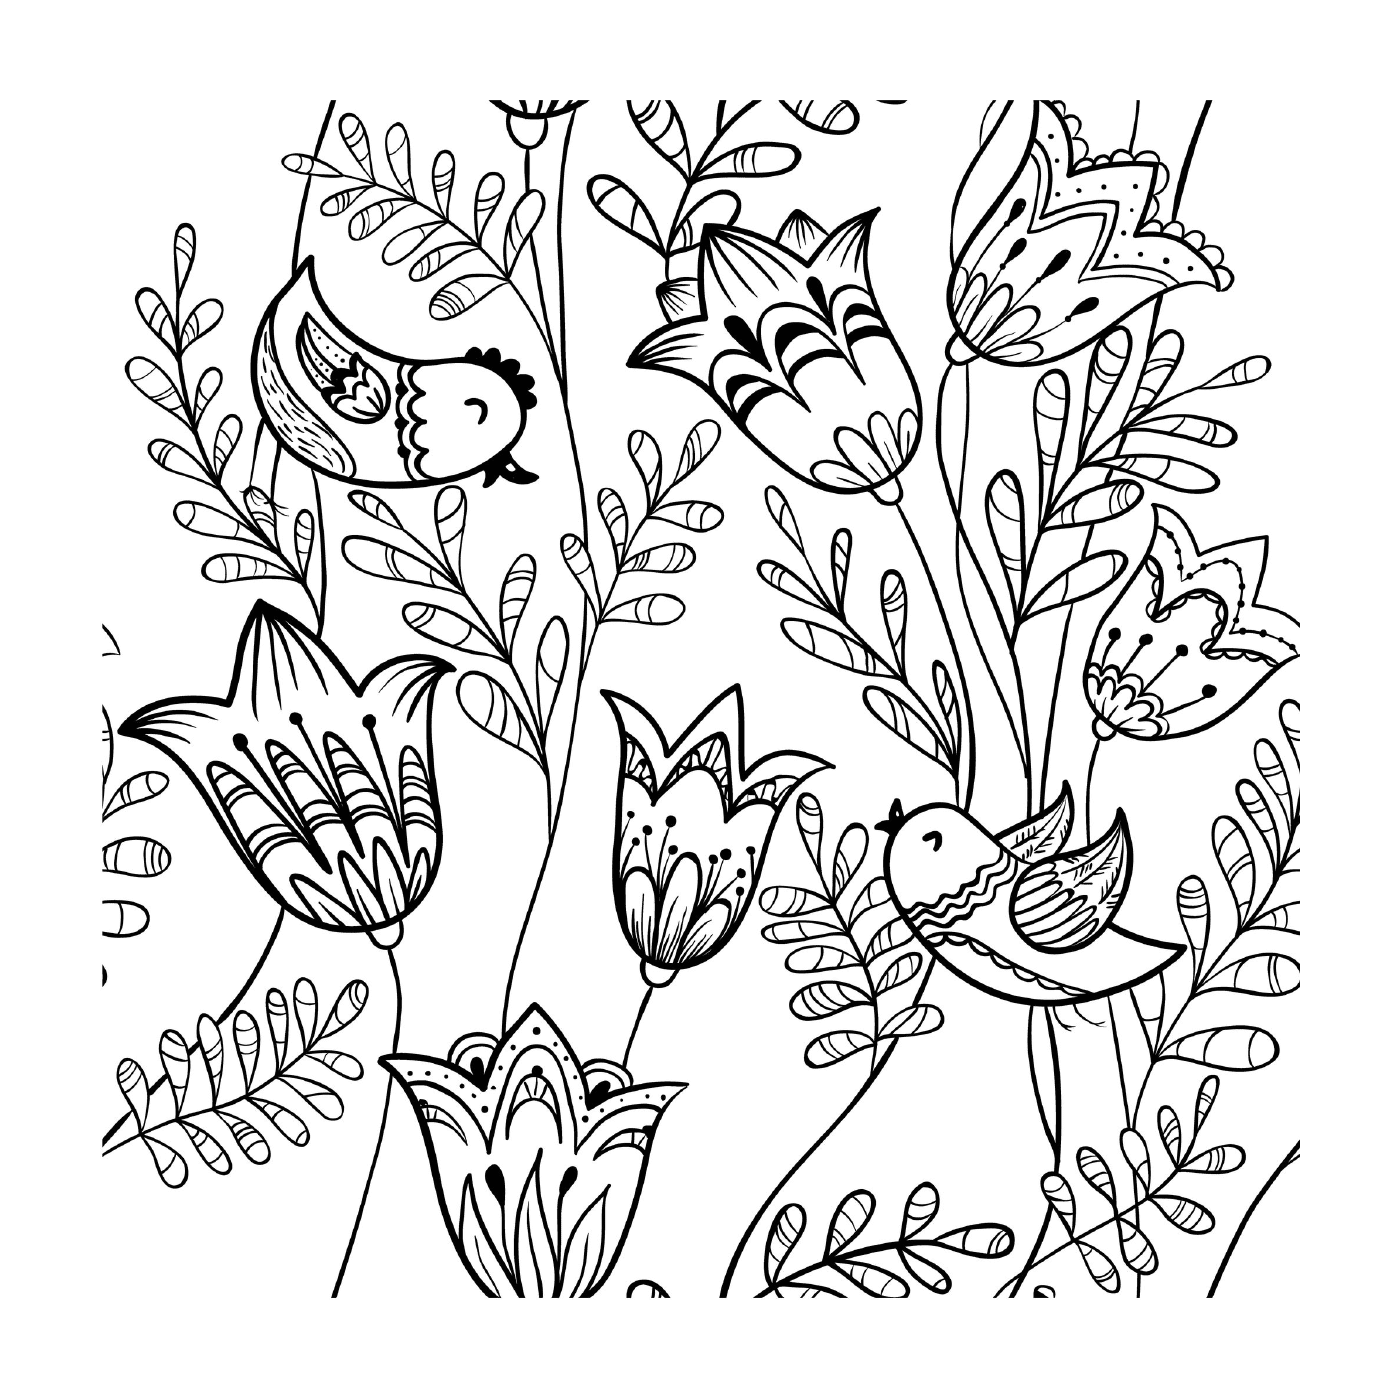  Birds and flowers 